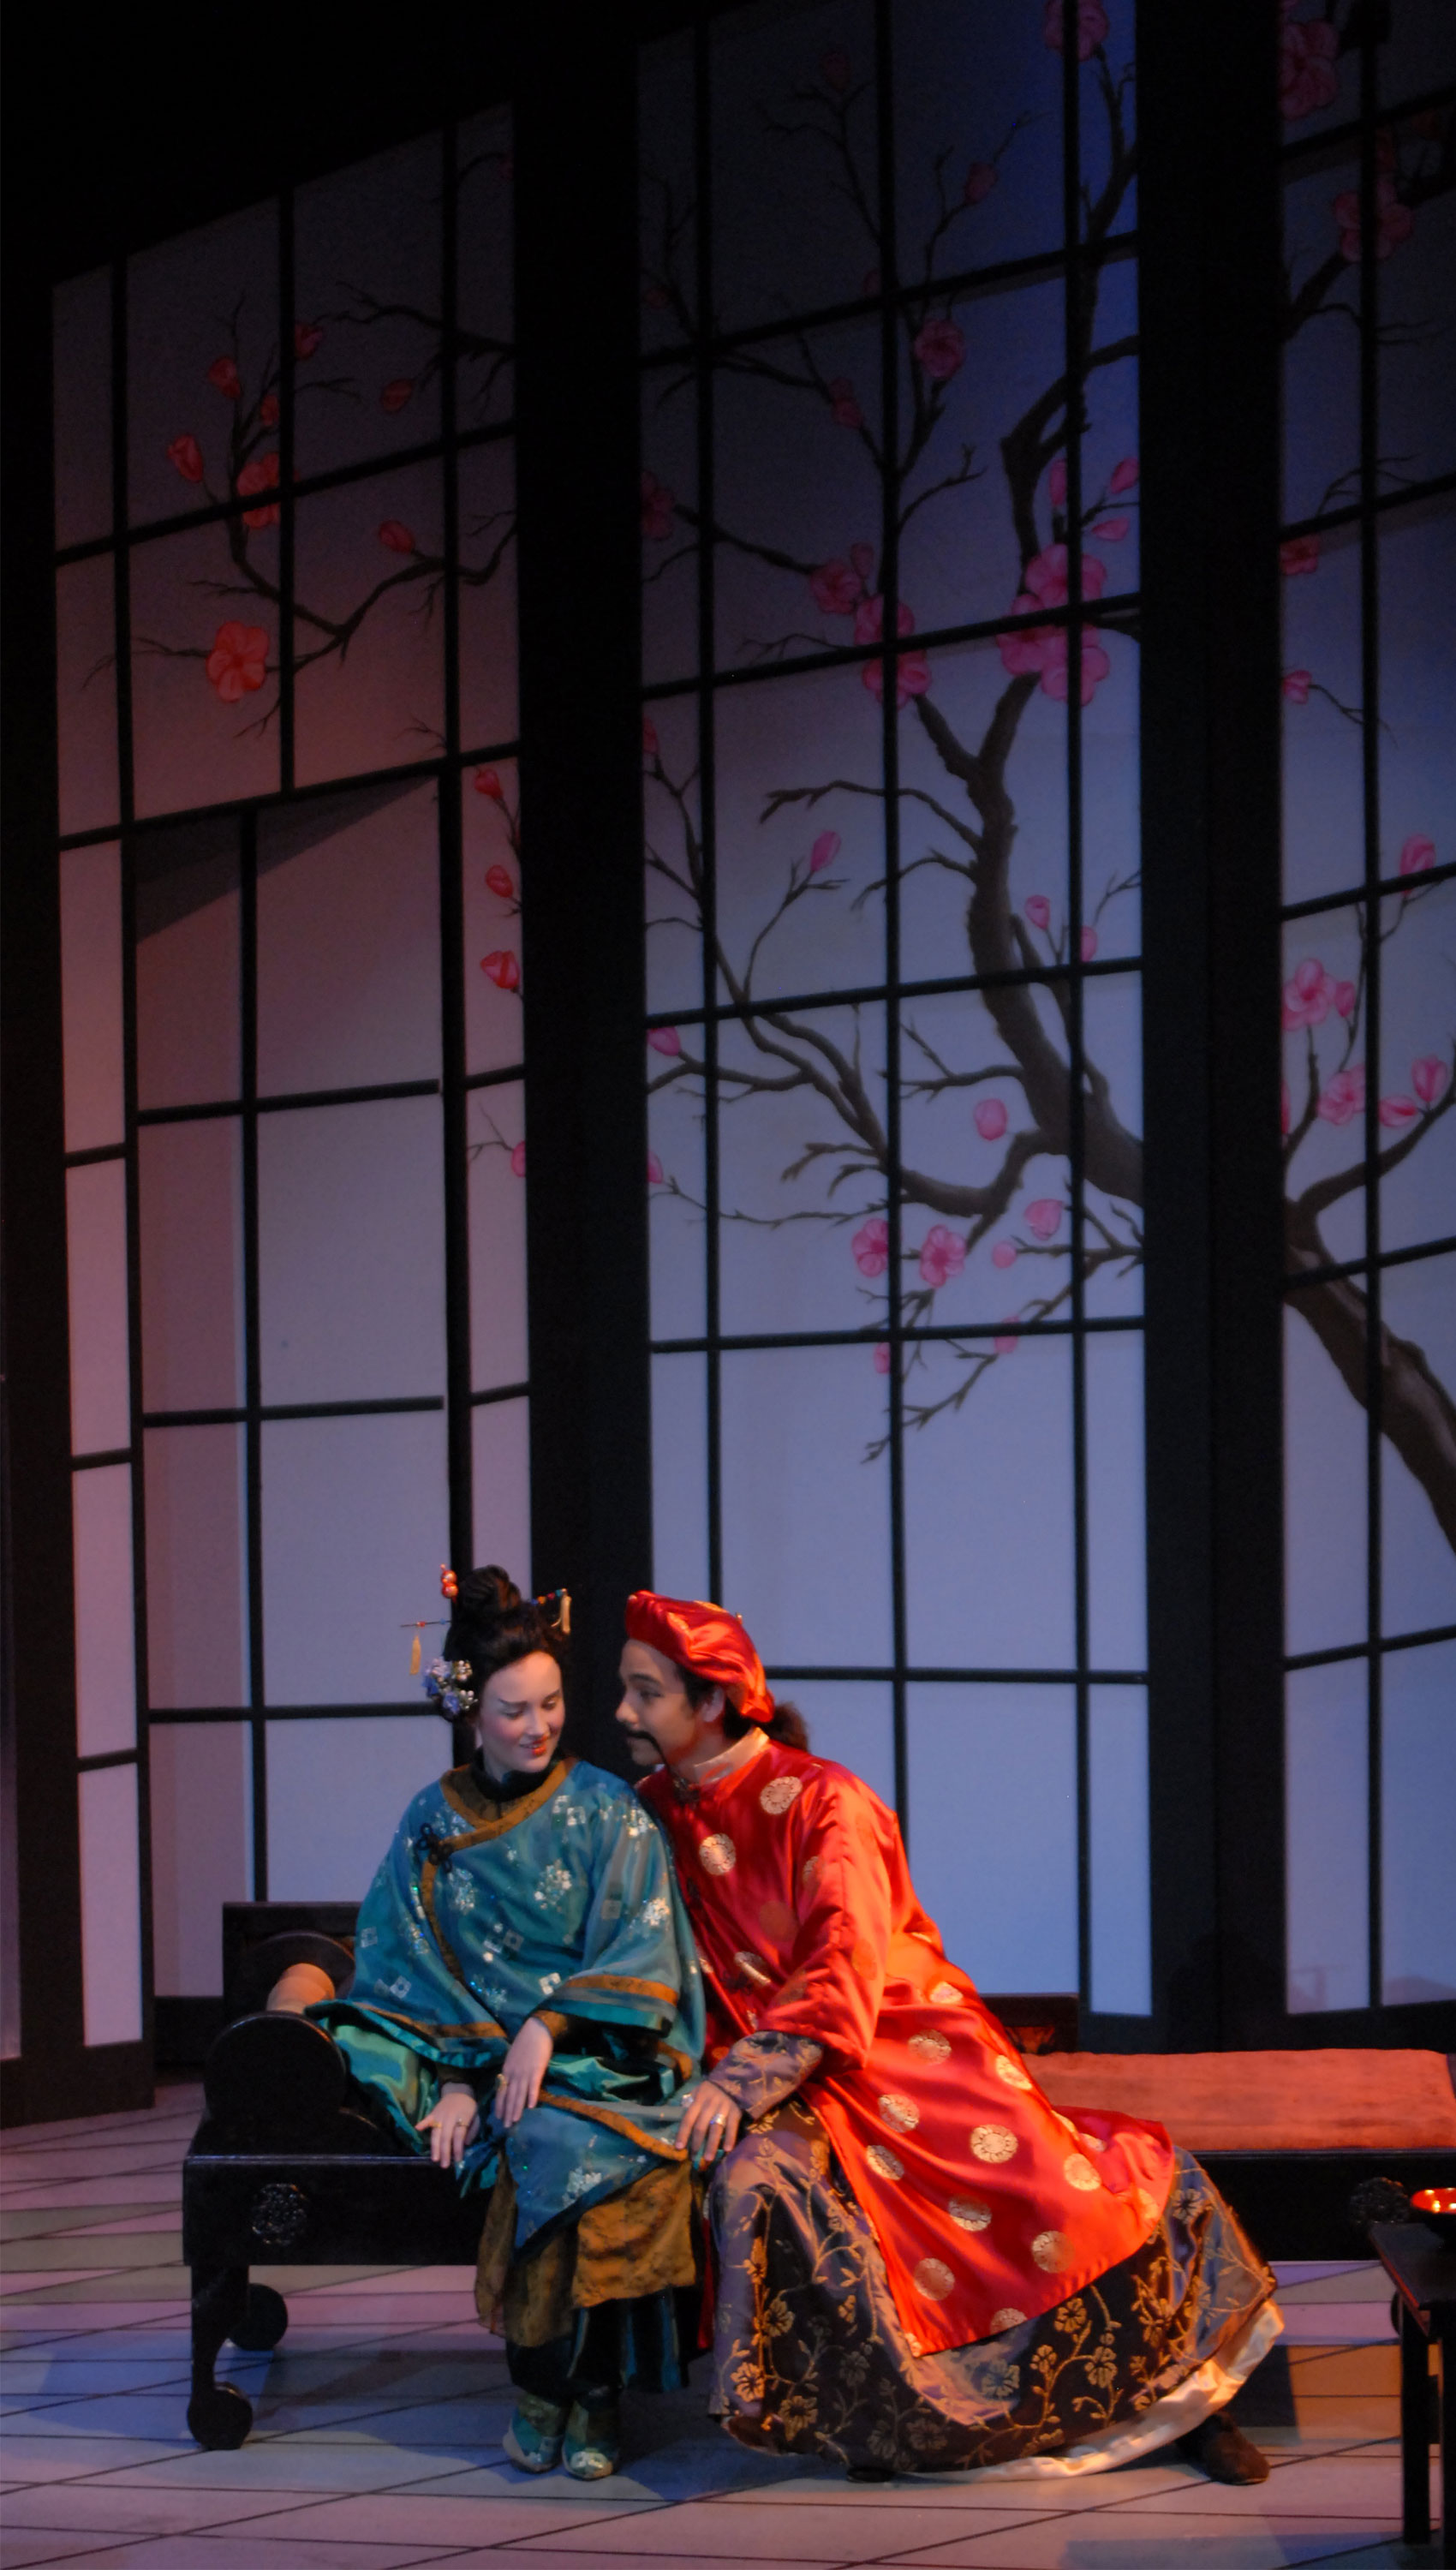 A woman dressed in Asian-inspired fashion and heavy makeup is on a bench next to a man, she is looking downstage coyly as she leans slightly away from him. The man is also wearing fashion reflective of Asian culture and is staring at the woman while smiling.